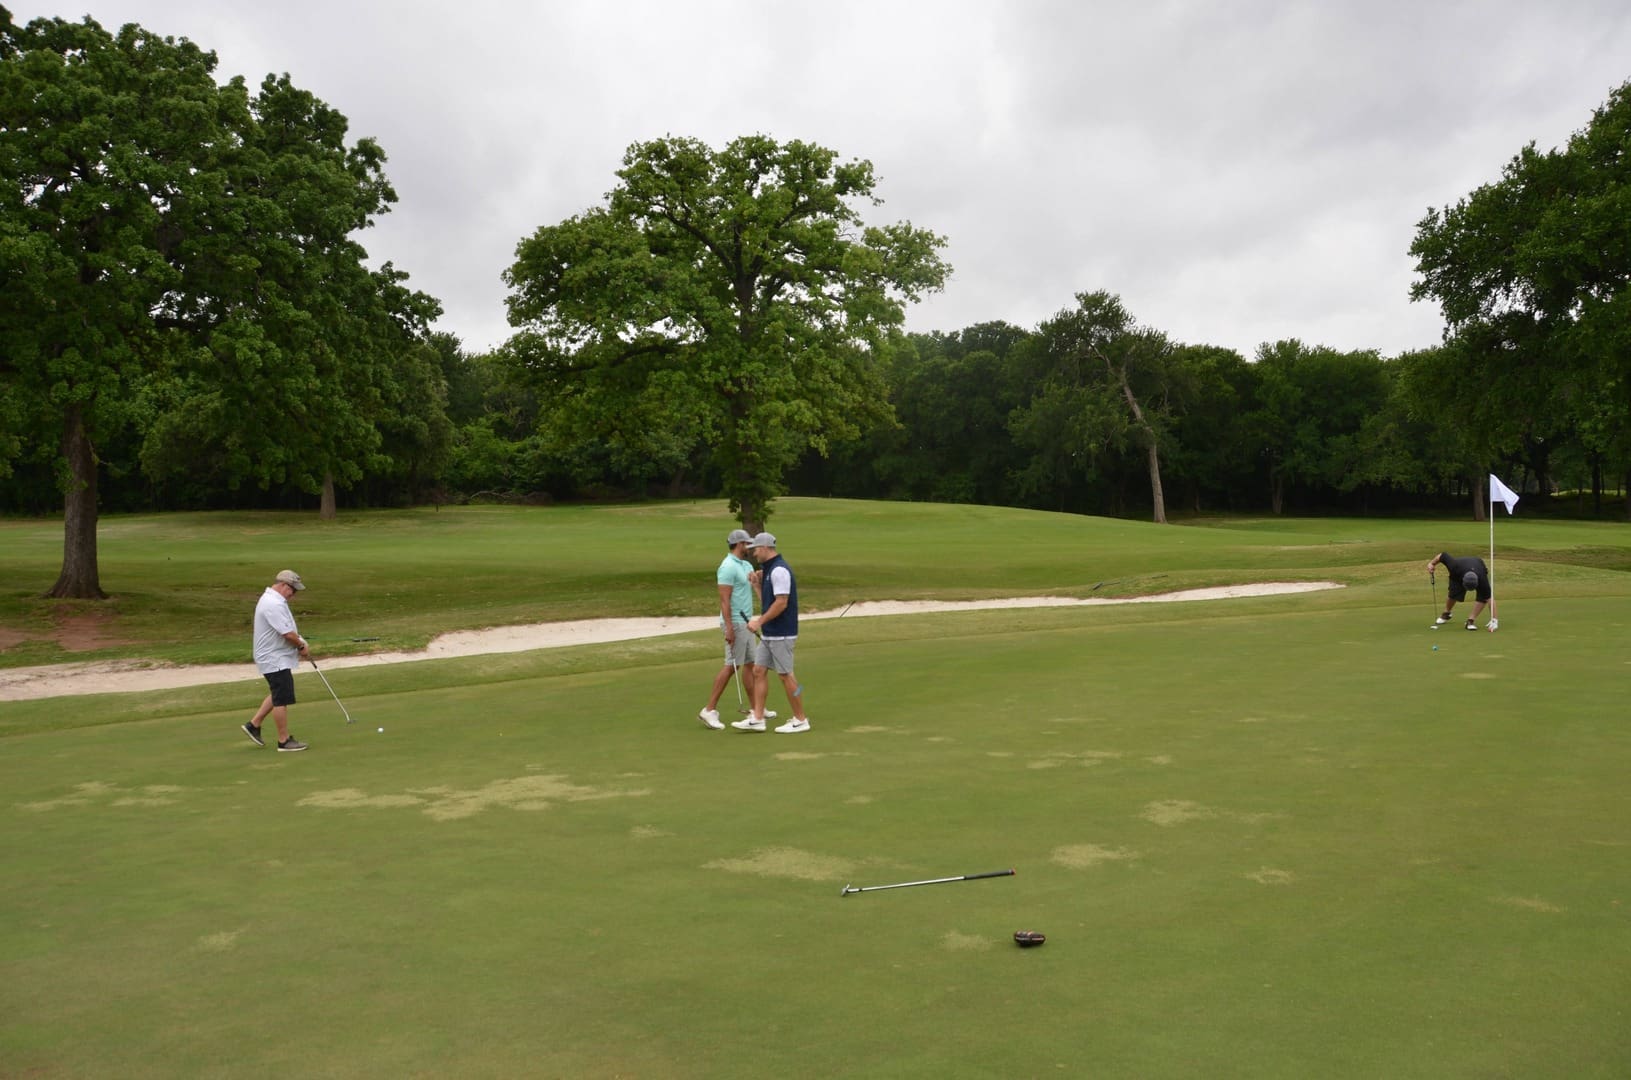 group of golfers on the field with trees and gray sky